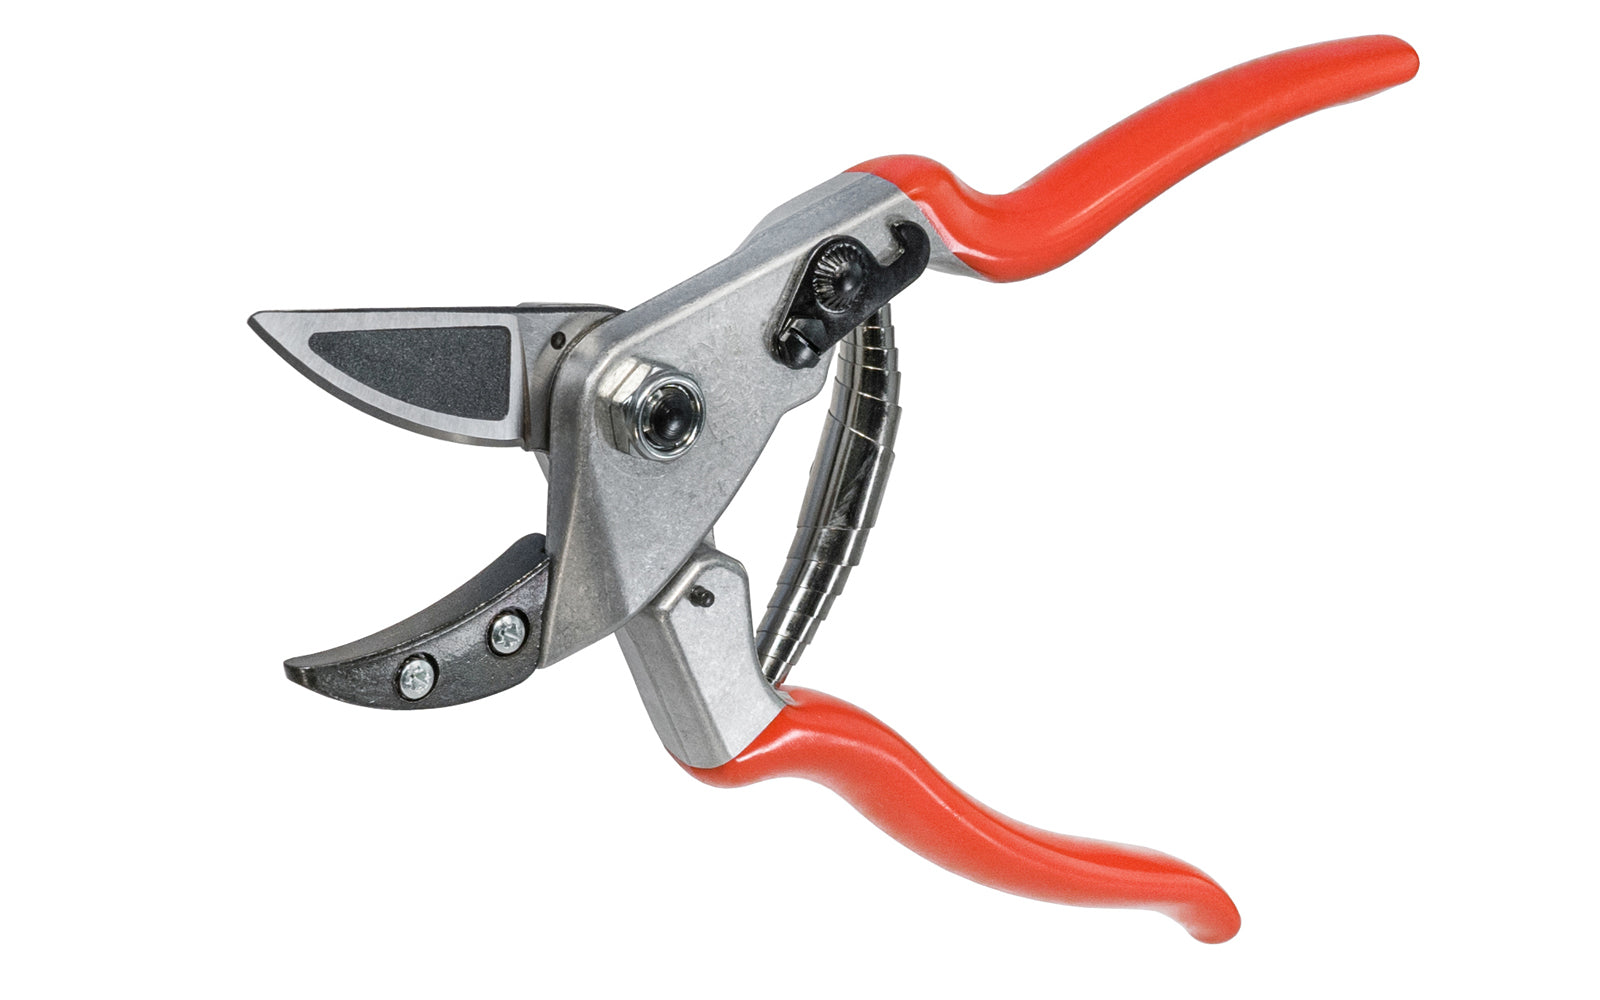 Made in Switzerland - Felco - Model 32 - Swiss Made anvil pruner - Large Hand Size - quality & special Swiss curved anvil pruner made by Felco in Switzerland. These pruners are comfortable & light, with a blade made of high-quality hardened steel. - Cutting diameter 1" (25 mm) - Spring loaded - 783929100722